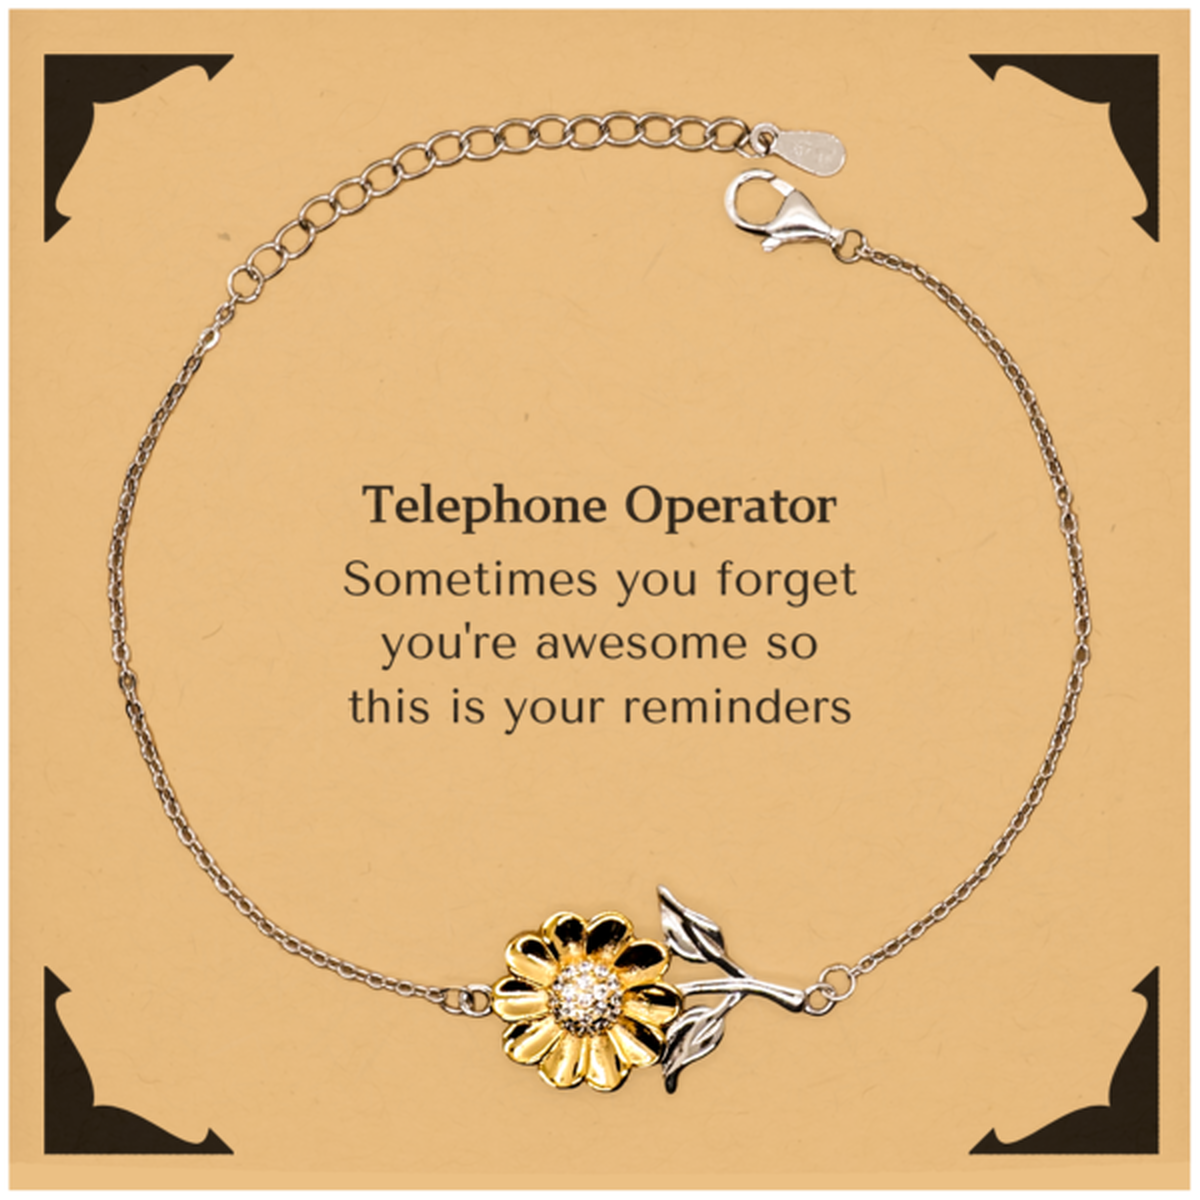 Sentimental Telephone Operator Sunflower Bracelet, Telephone Operator Sometimes you forget you're awesome so this is your reminders, Graduation Christmas Birthday Gifts for Telephone Operator, Men, Women, Coworkers